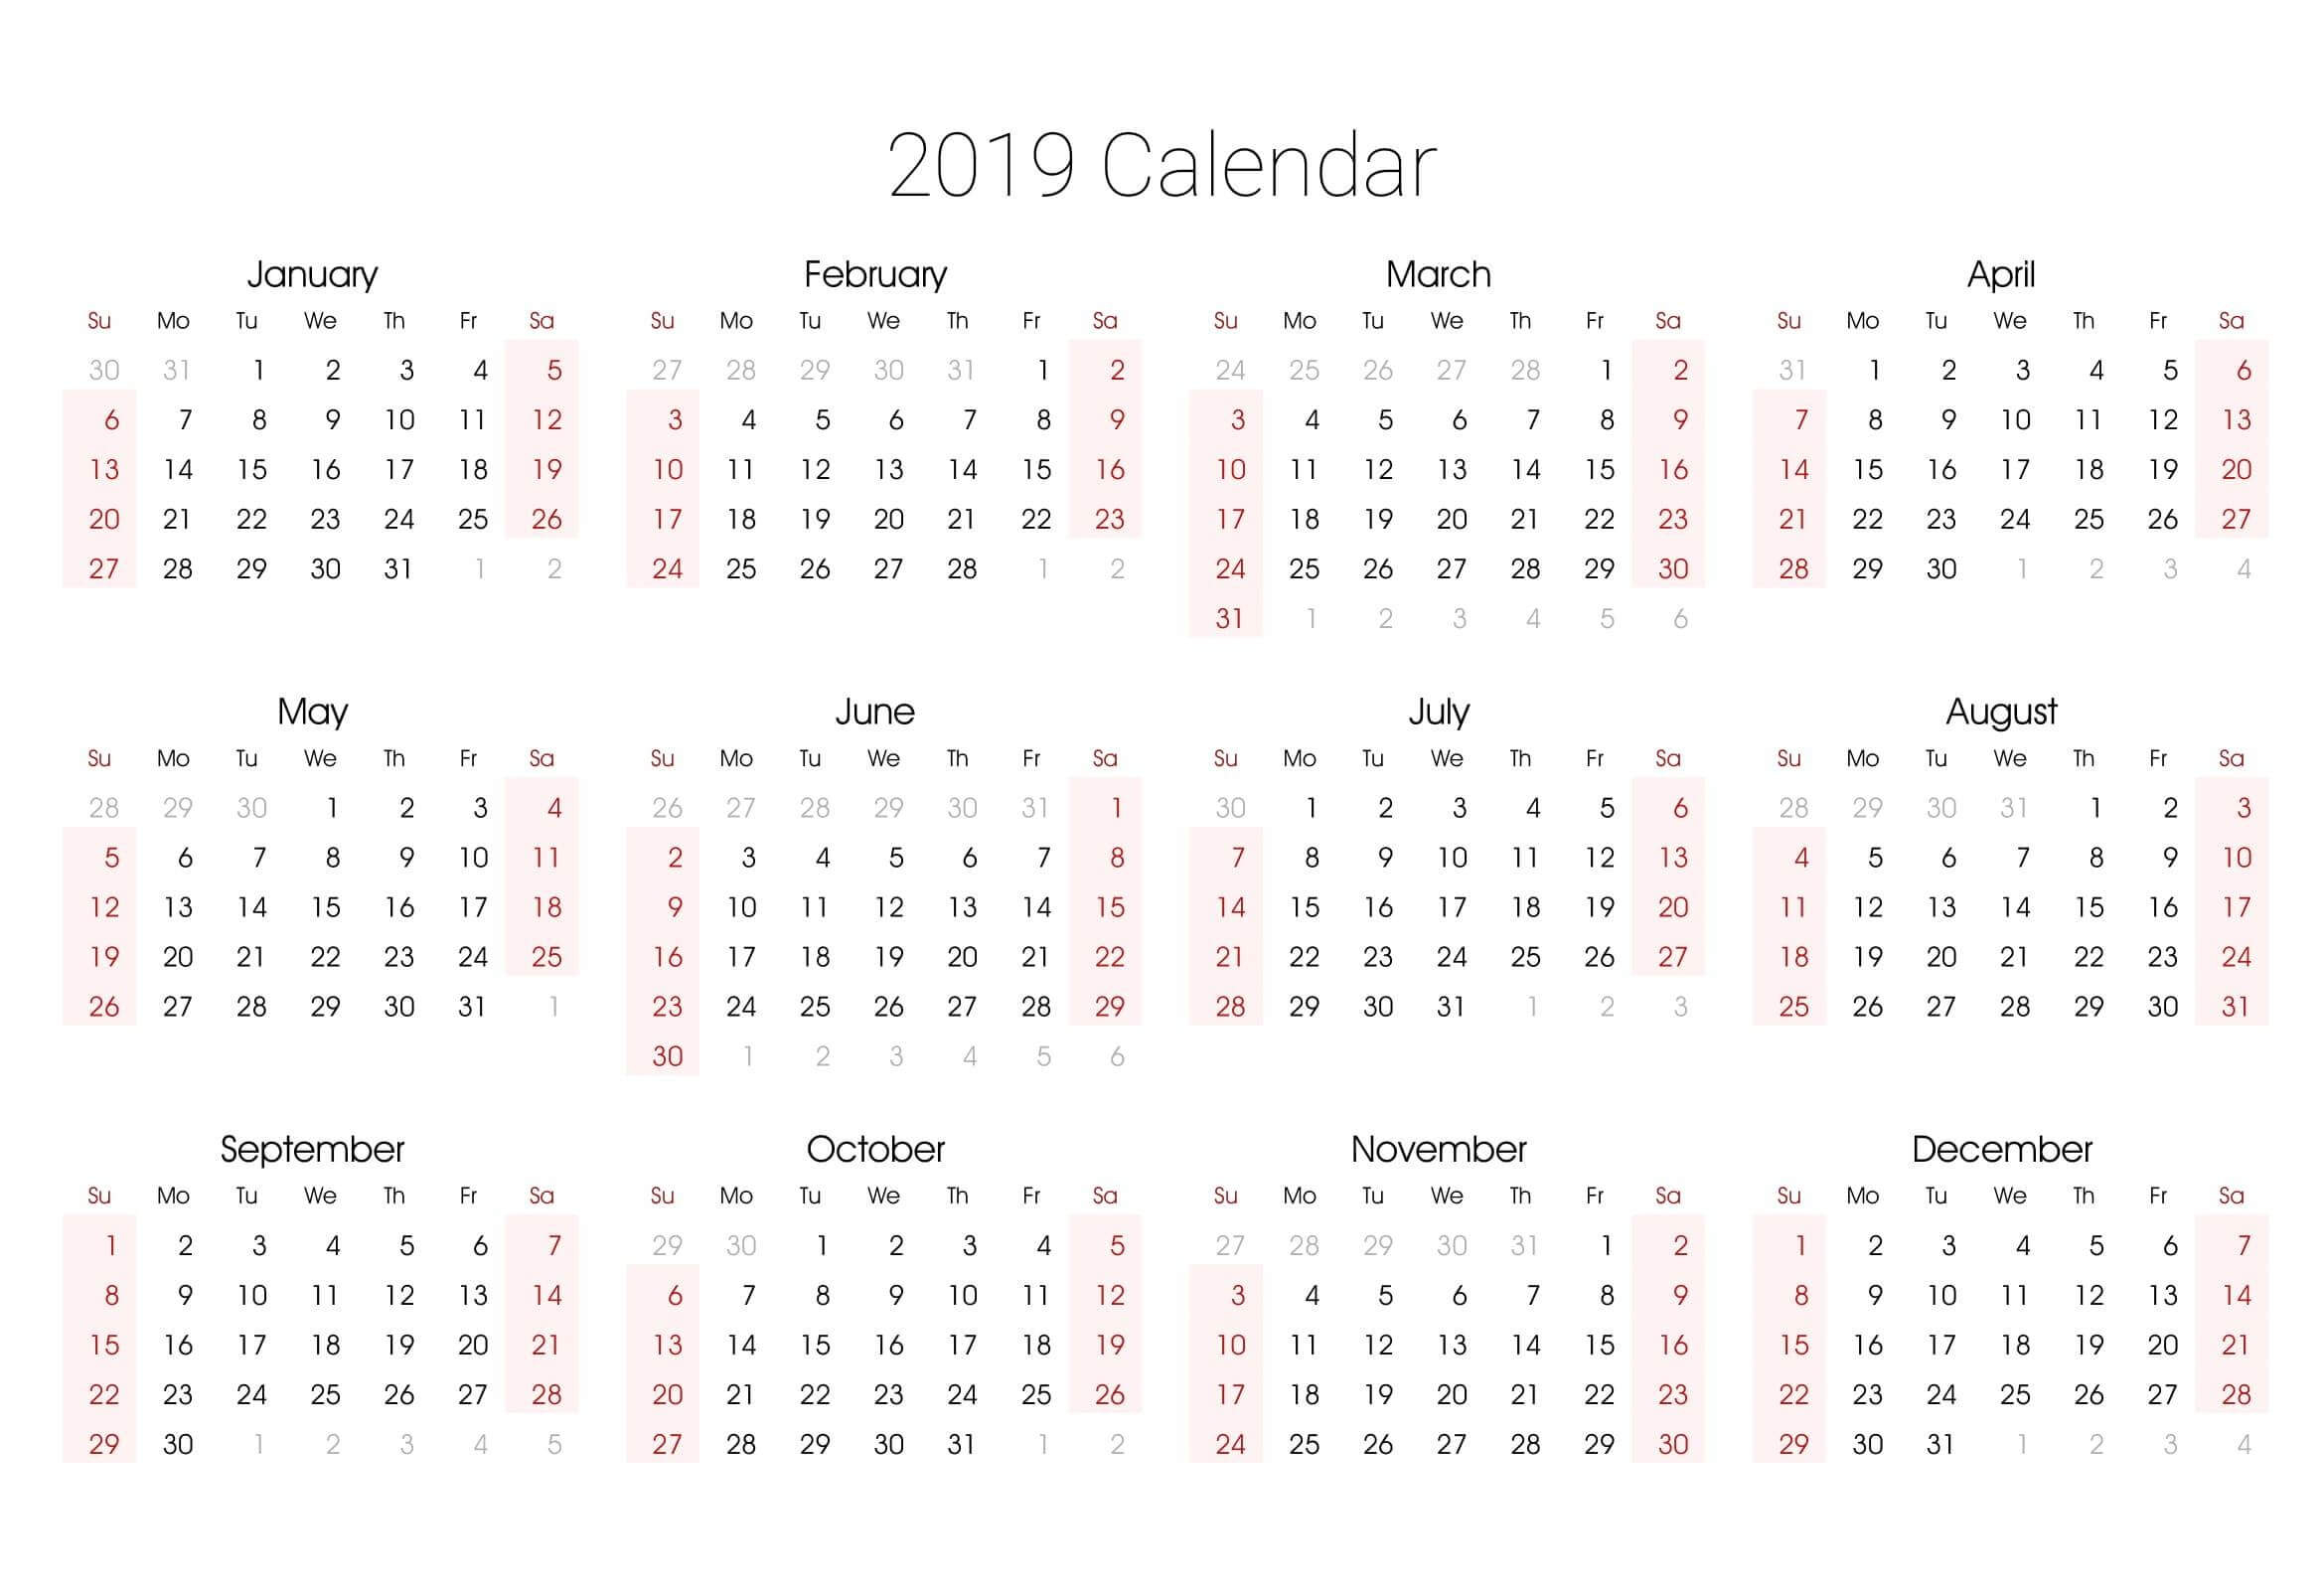 Yearly Calendar Template With Notes 2020 - 2019 Calendars